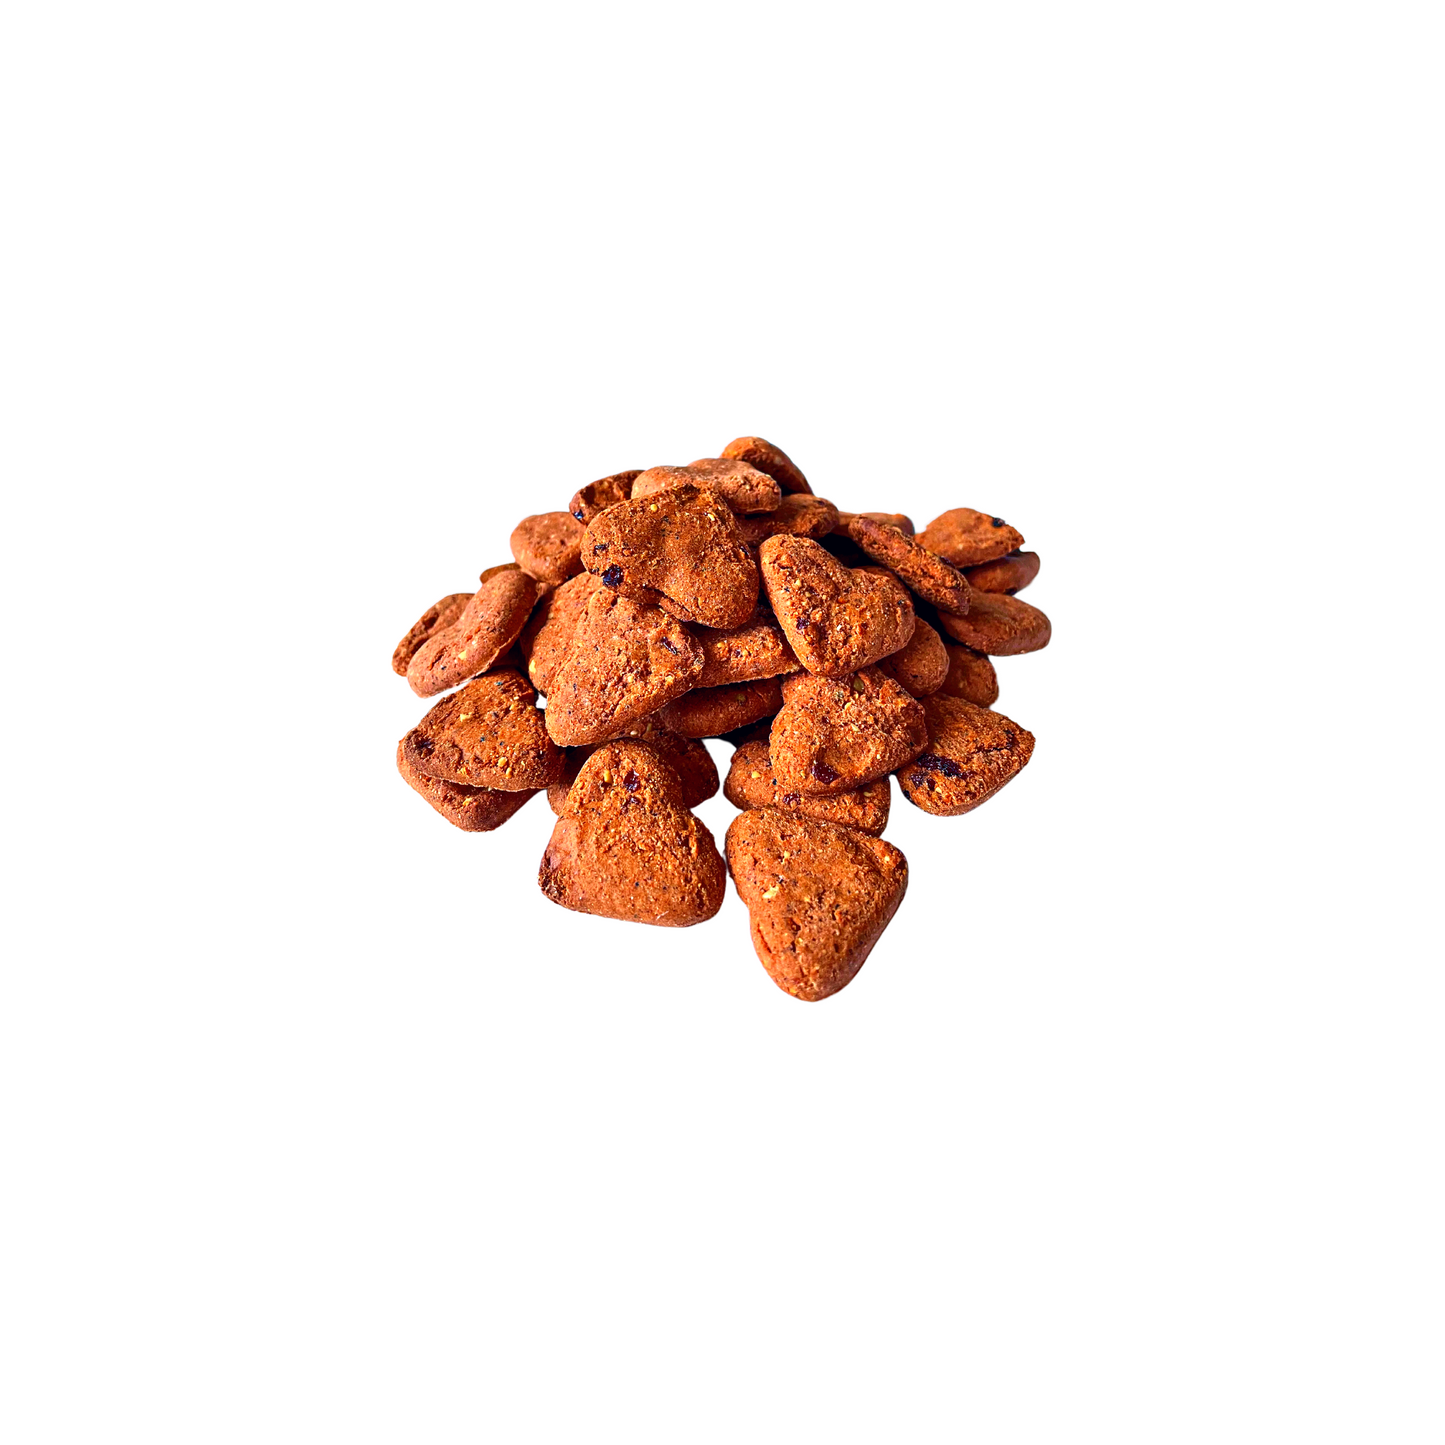 muthapuppa LOVES, 100% Natural & Delicious Dog Biscuits, Made With Real Red Berries, 300g